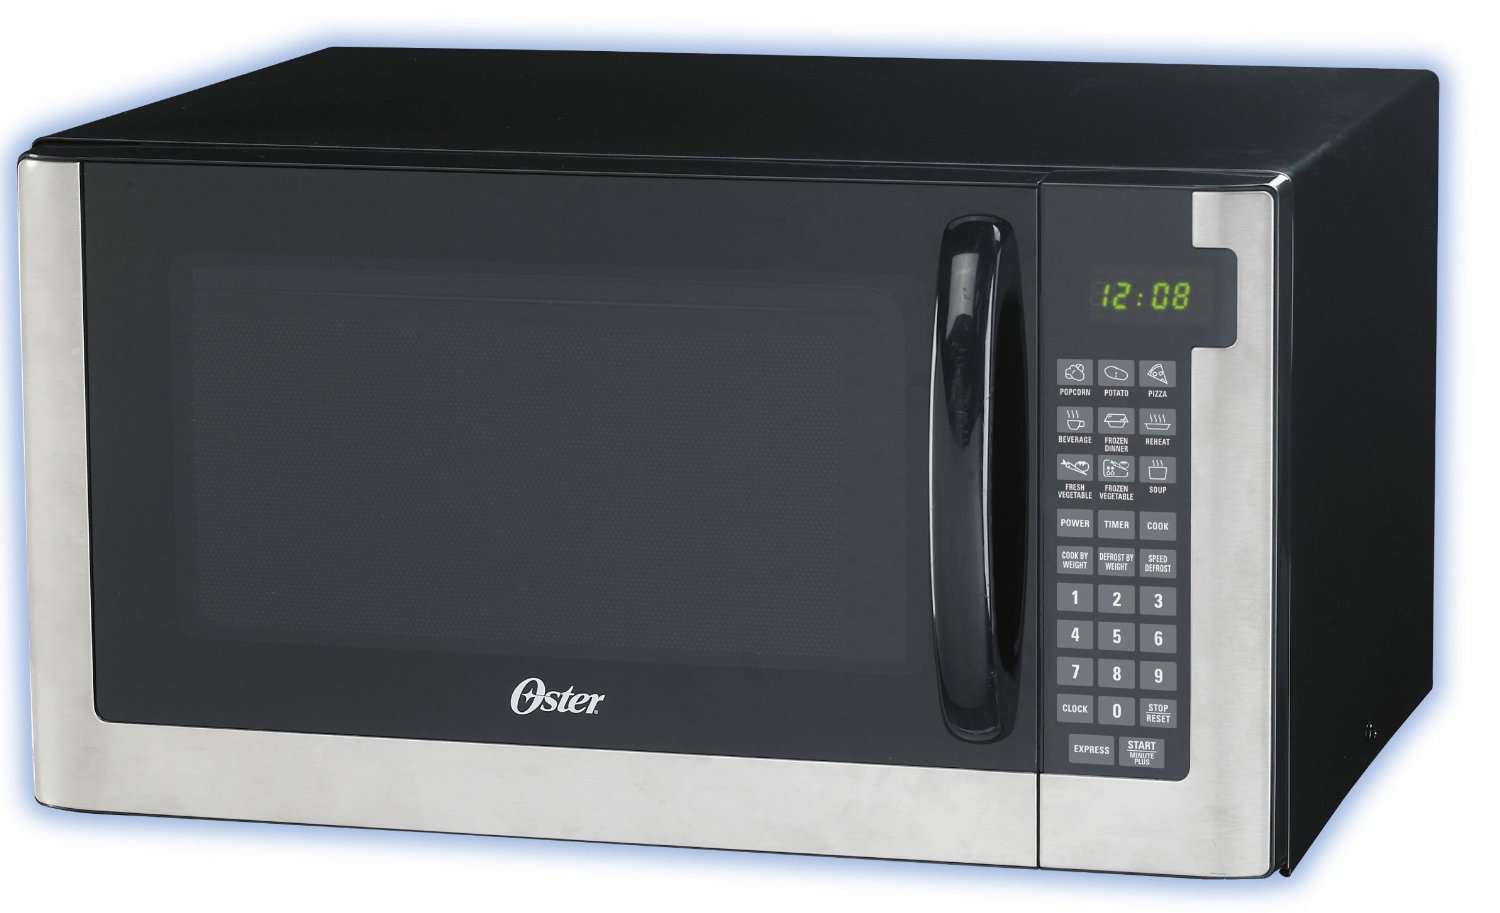 Oster OGG61403 1-2/5-Cubic-Feet Microwave Oven, Stainless Steel